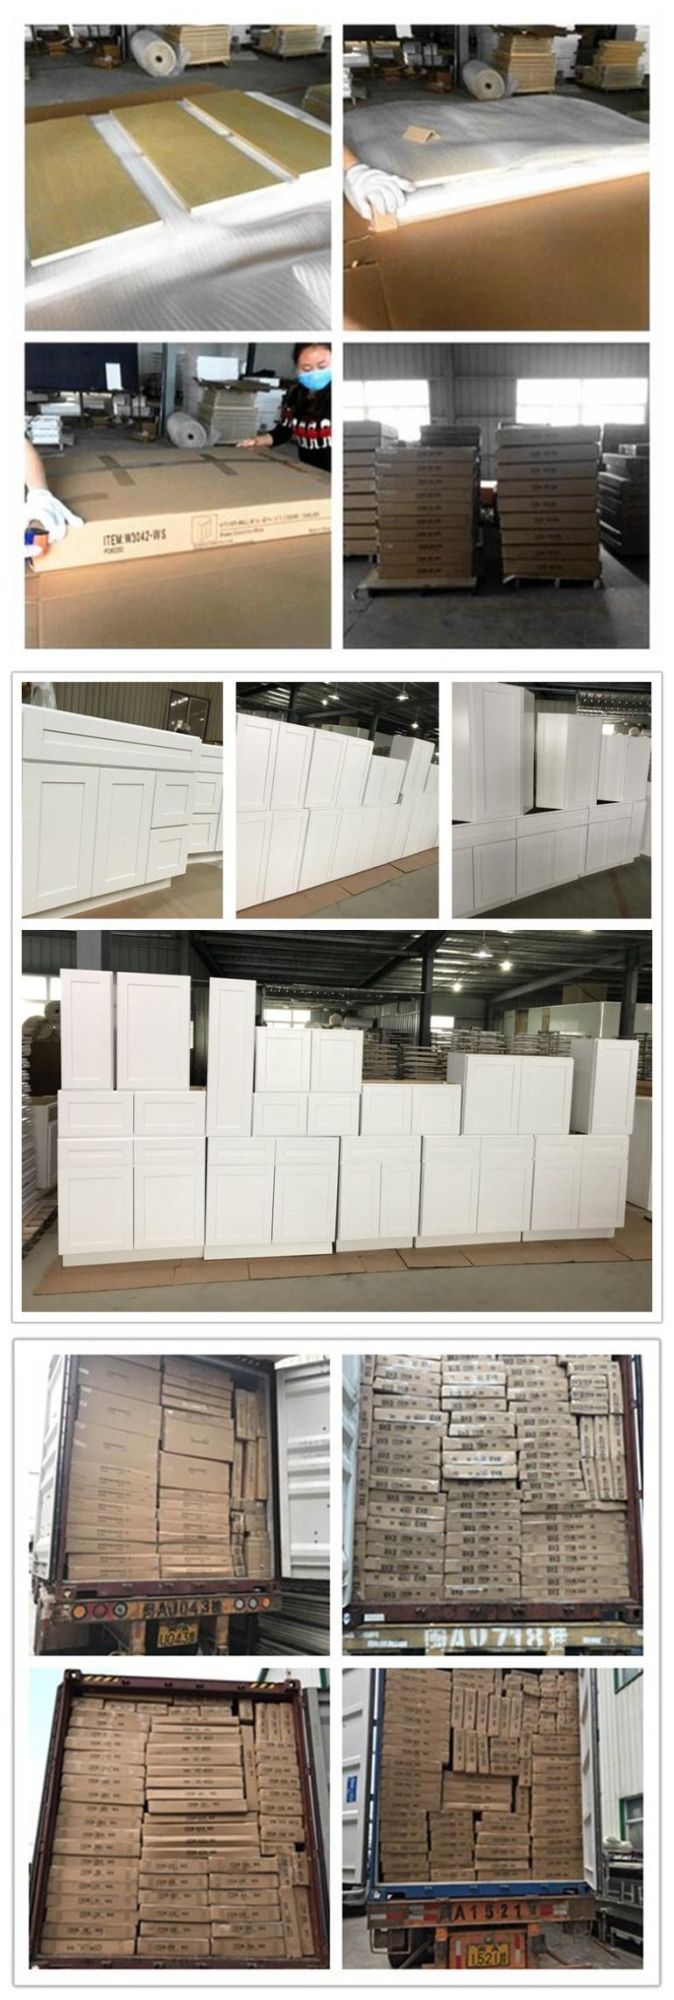 European High-End Solid Wood Kitchen Cabinets Made in China for Wholesale